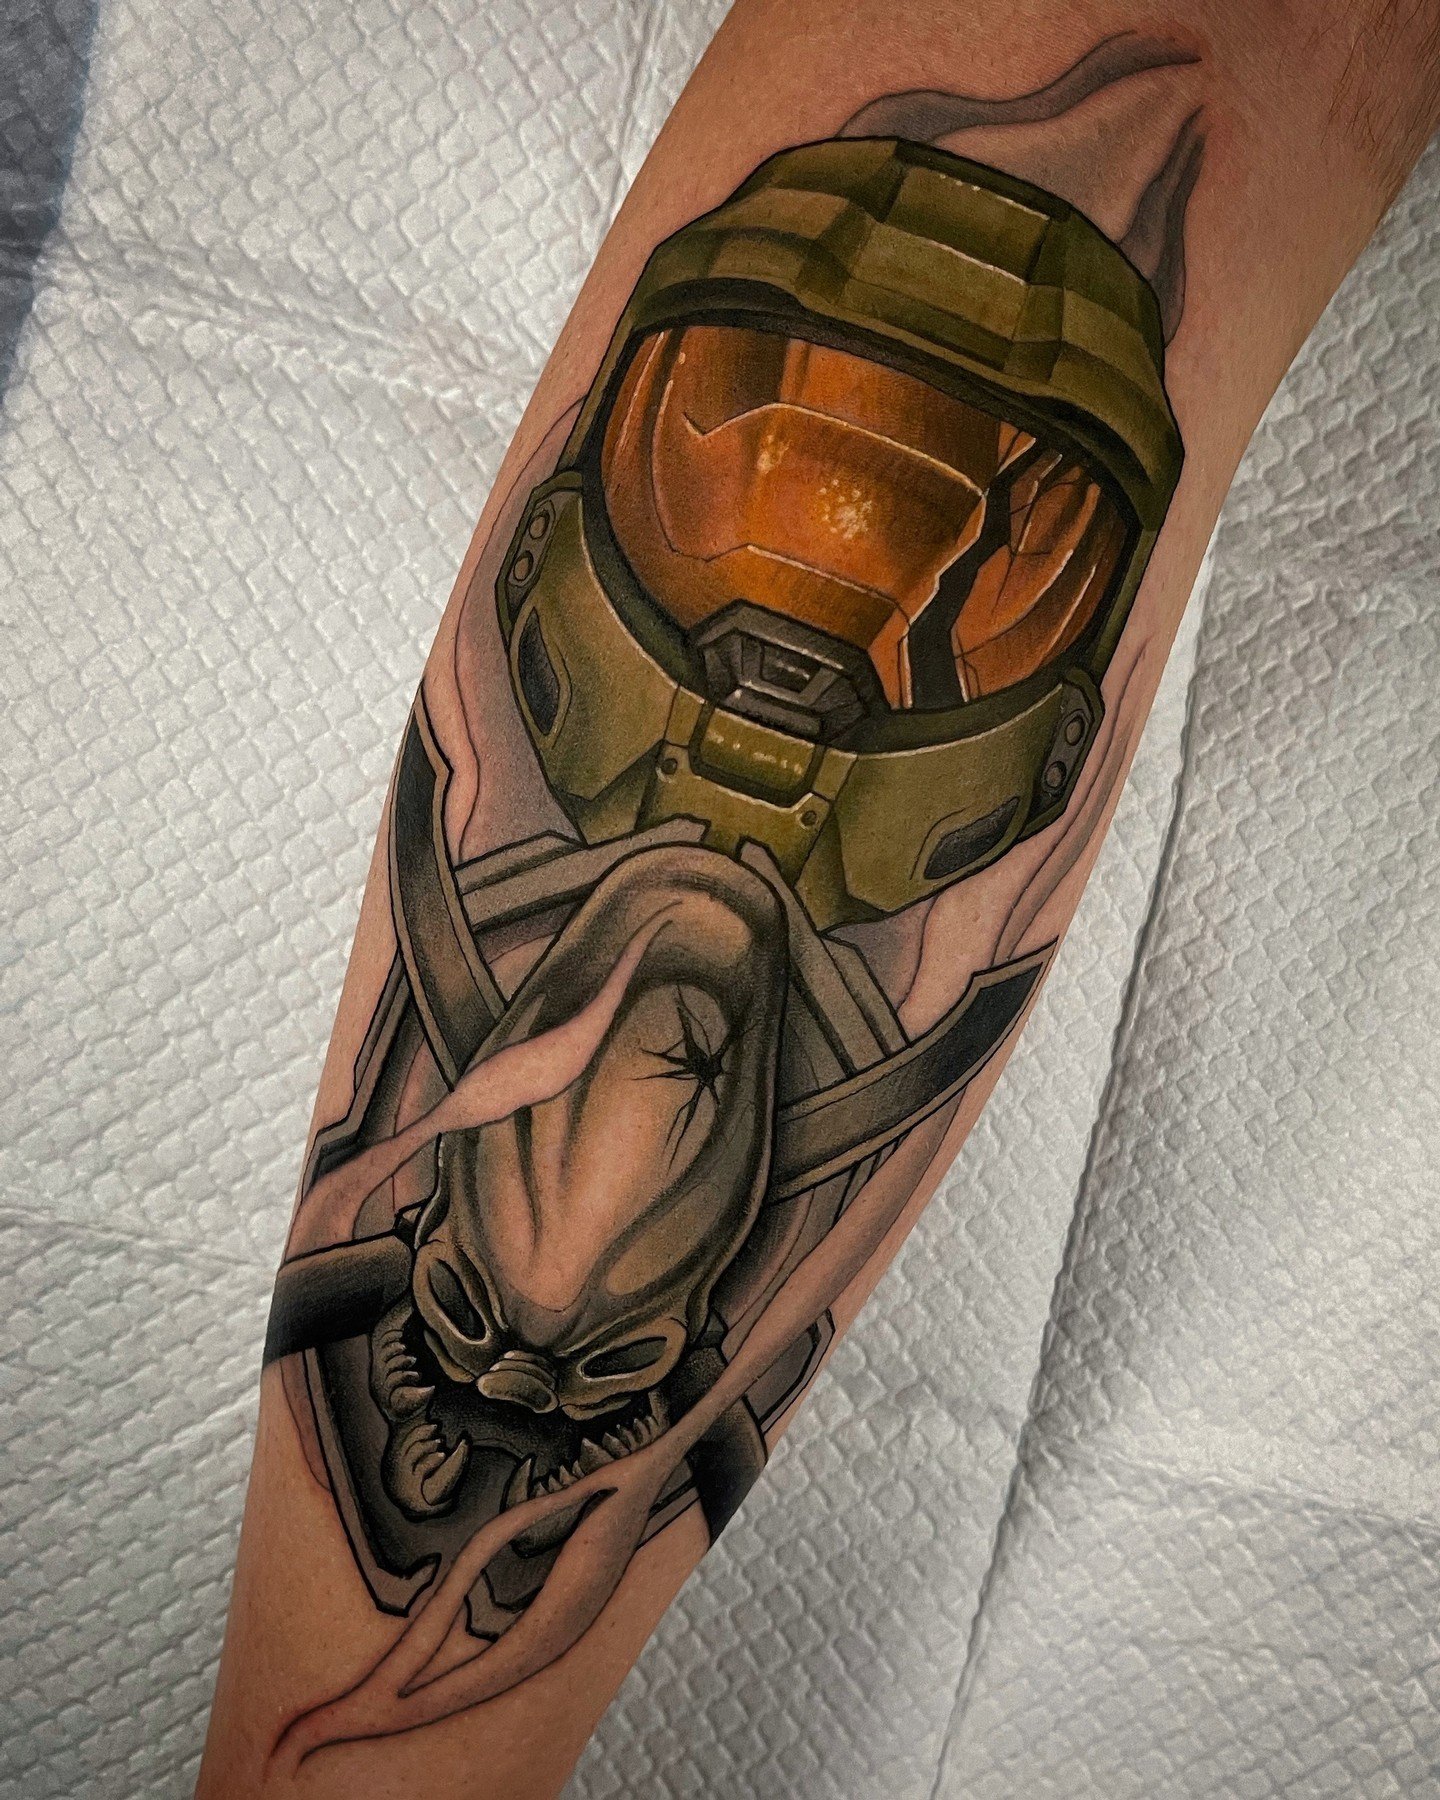 Halo Fan Gets Incredible Master Chief Tattoo